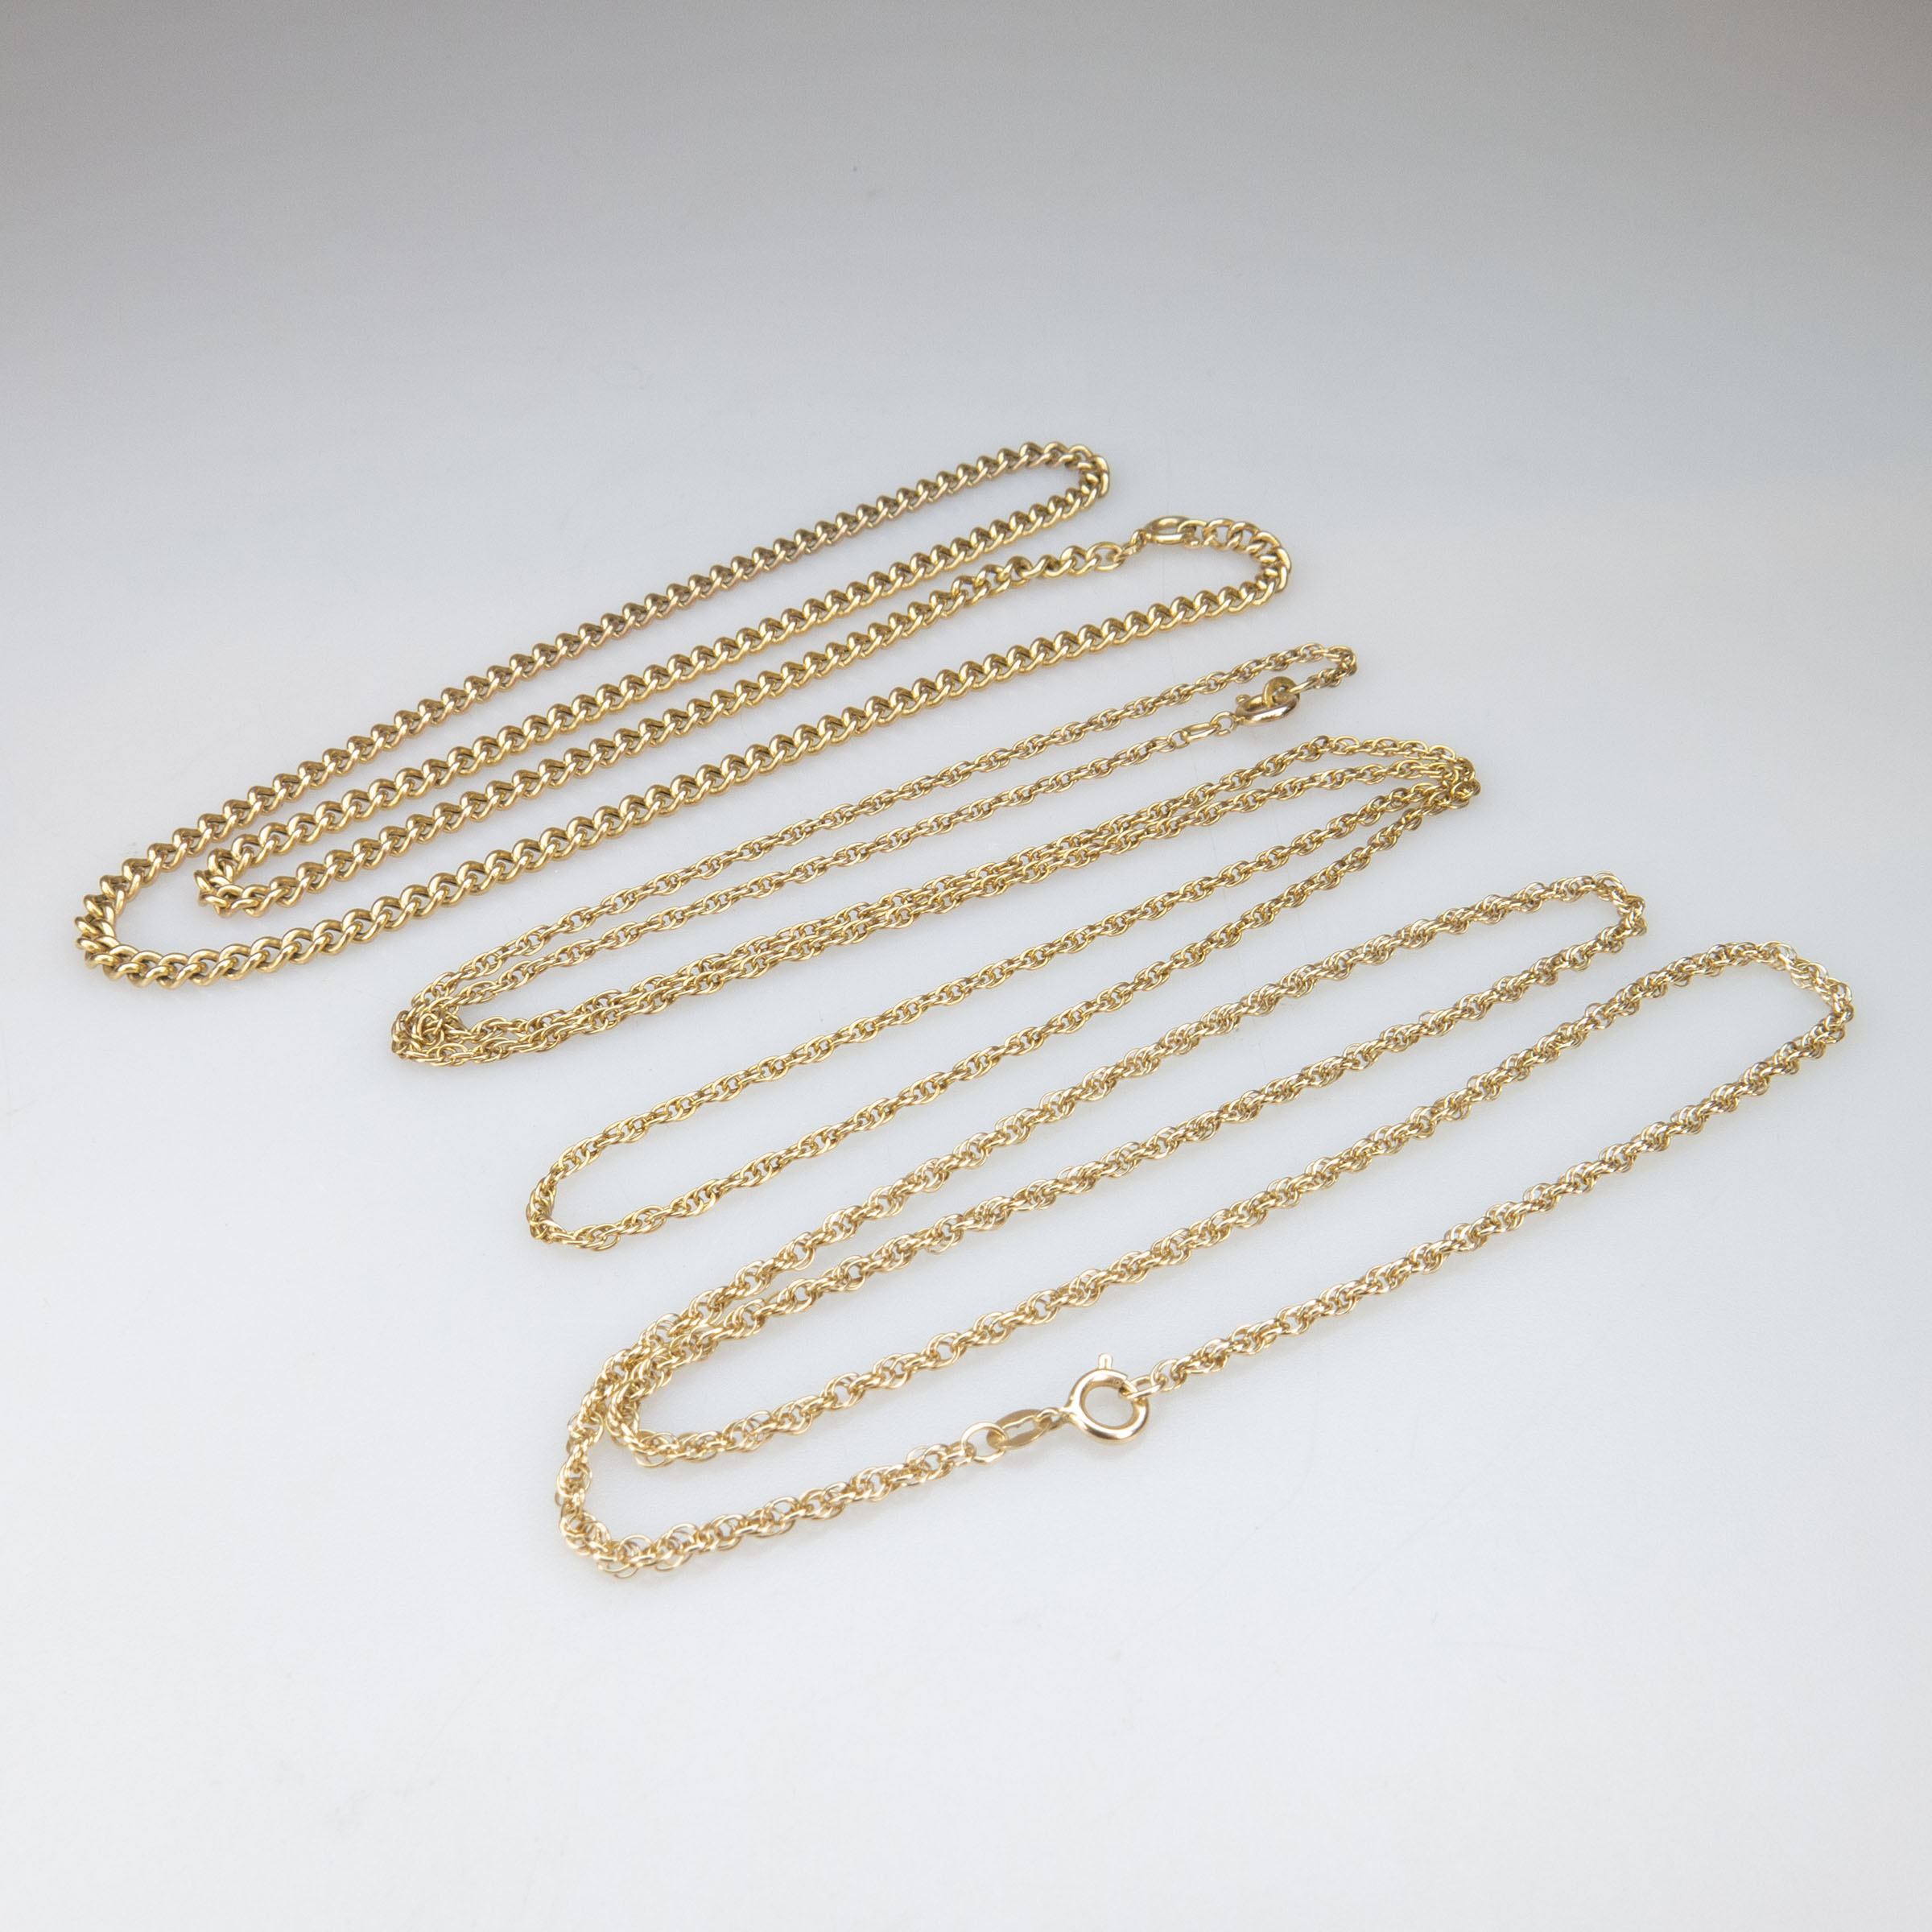 3 x 10k Yellow Gold Chains